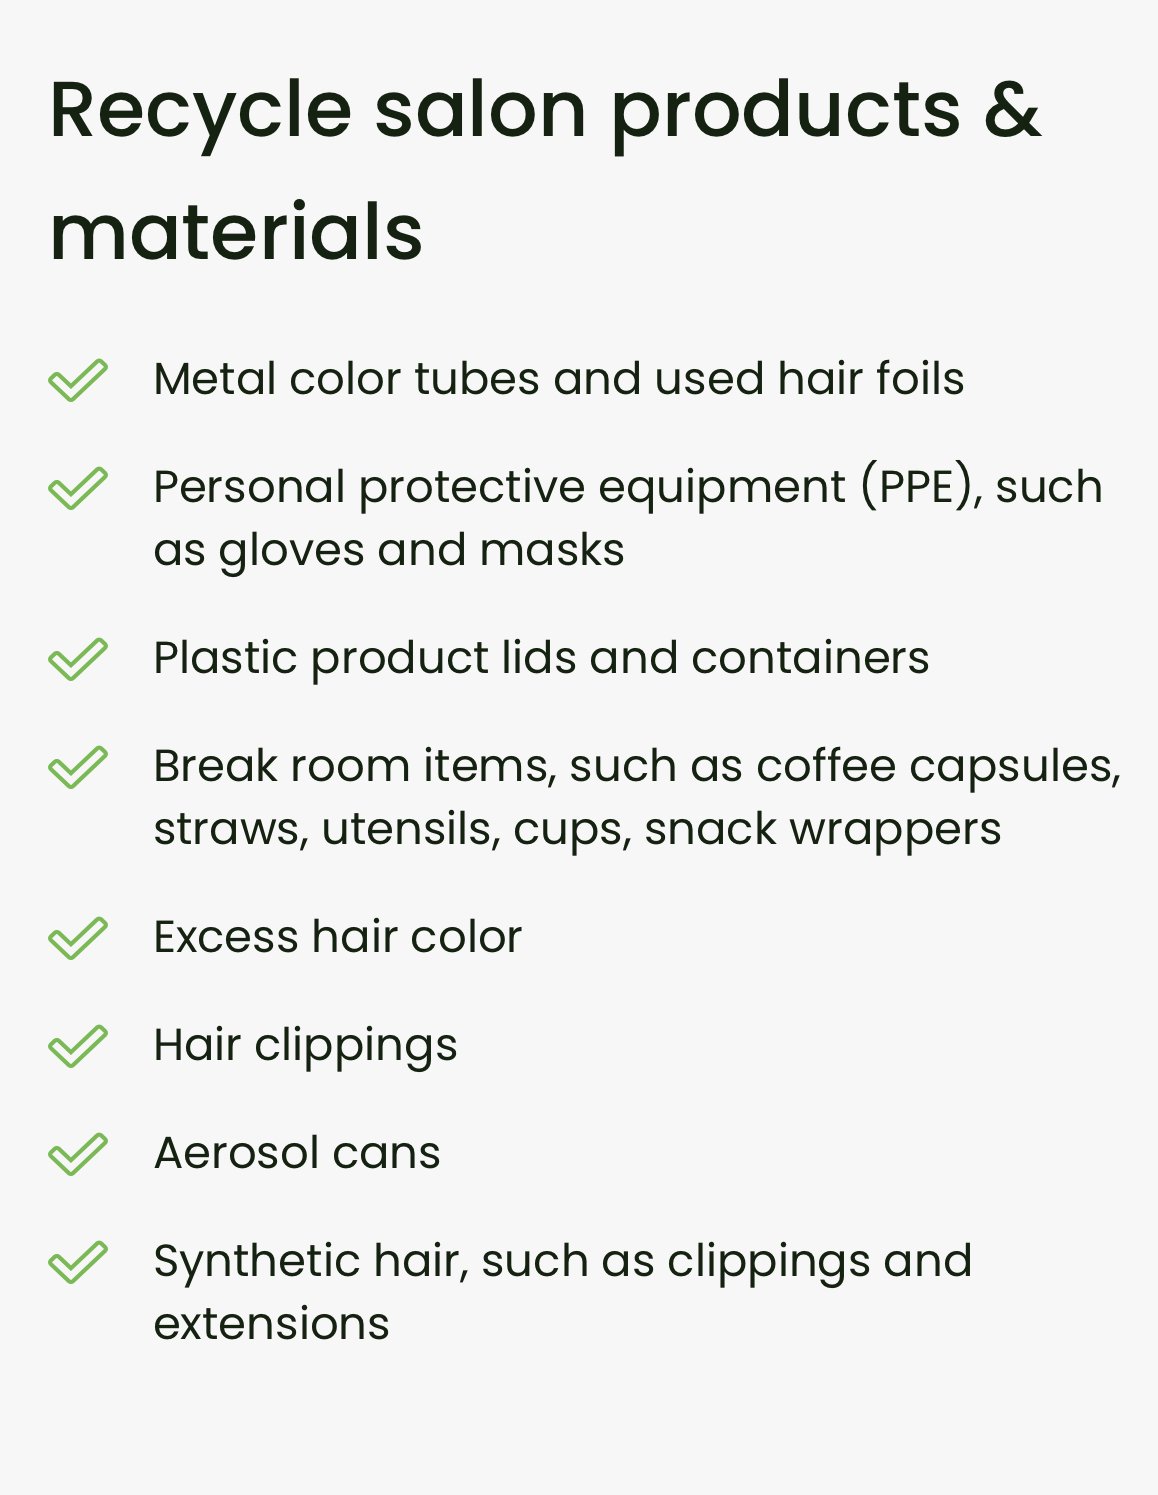 HOW TO RECYCLE USED FOILS, COLOR TUBES & HAIR CLIPPINGS 